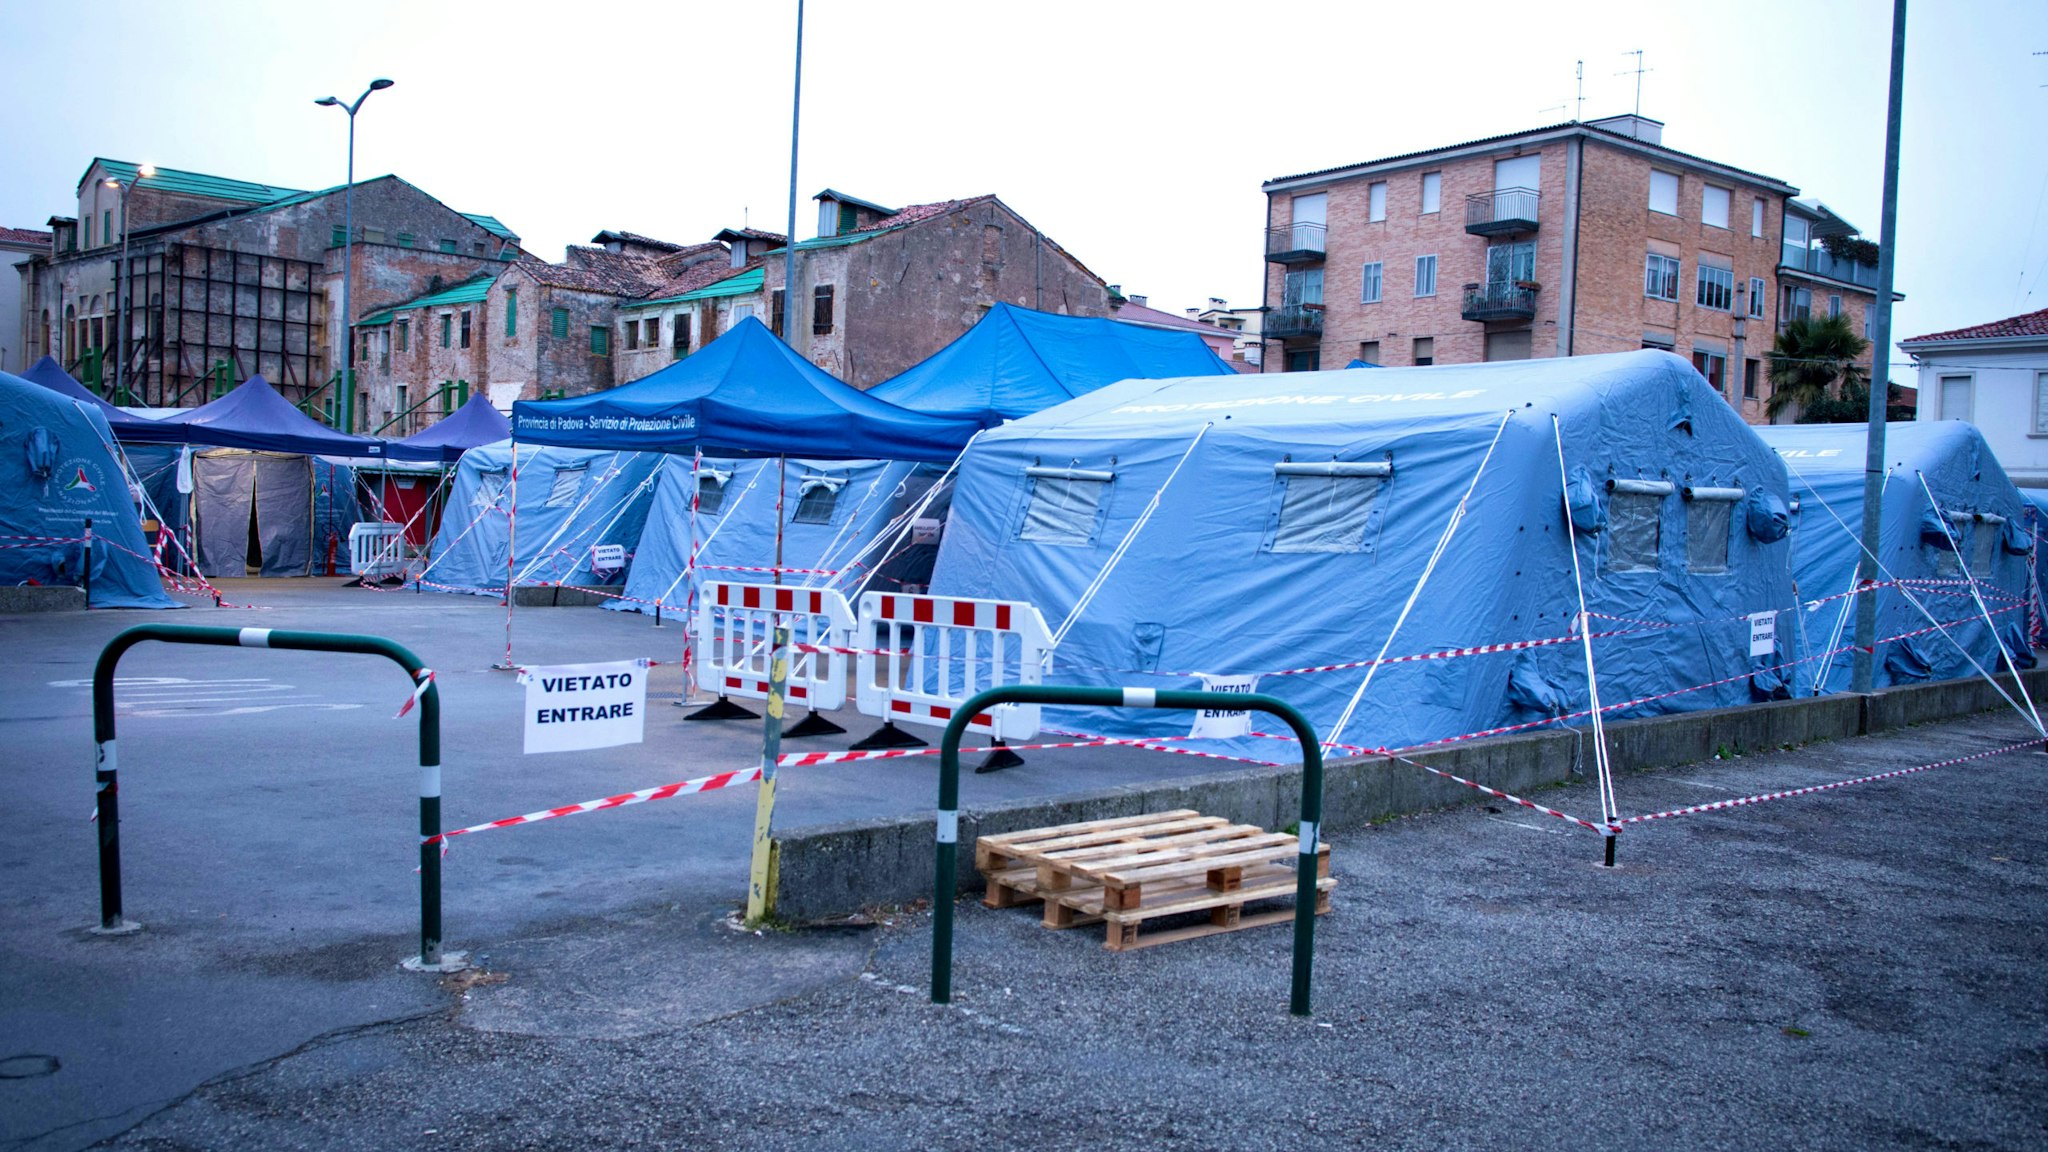 A view of tents near the Padua Hospital that will be used for patients hits by Coronavirus (Covid-19), in Padova, Italy, on March 7, 2020. The tents will be used for control swabs and checks on people who present themselves, with the aim of relieving, at least in part, the pressure on internal hospital structures, avoiding clogging up the emergency rooms and Infectious diseases for activities not directly related to their specificities.